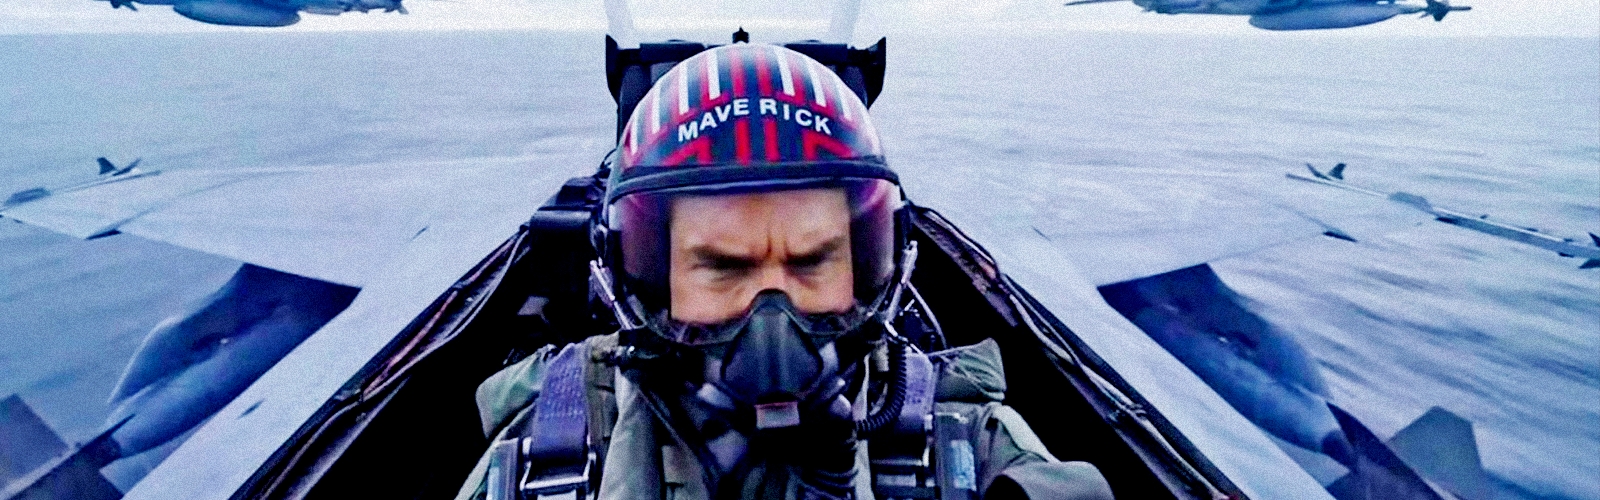 Our Review Of ‘Top Gun: Maverick’: Hell Yeah, Now This Is How You Do It